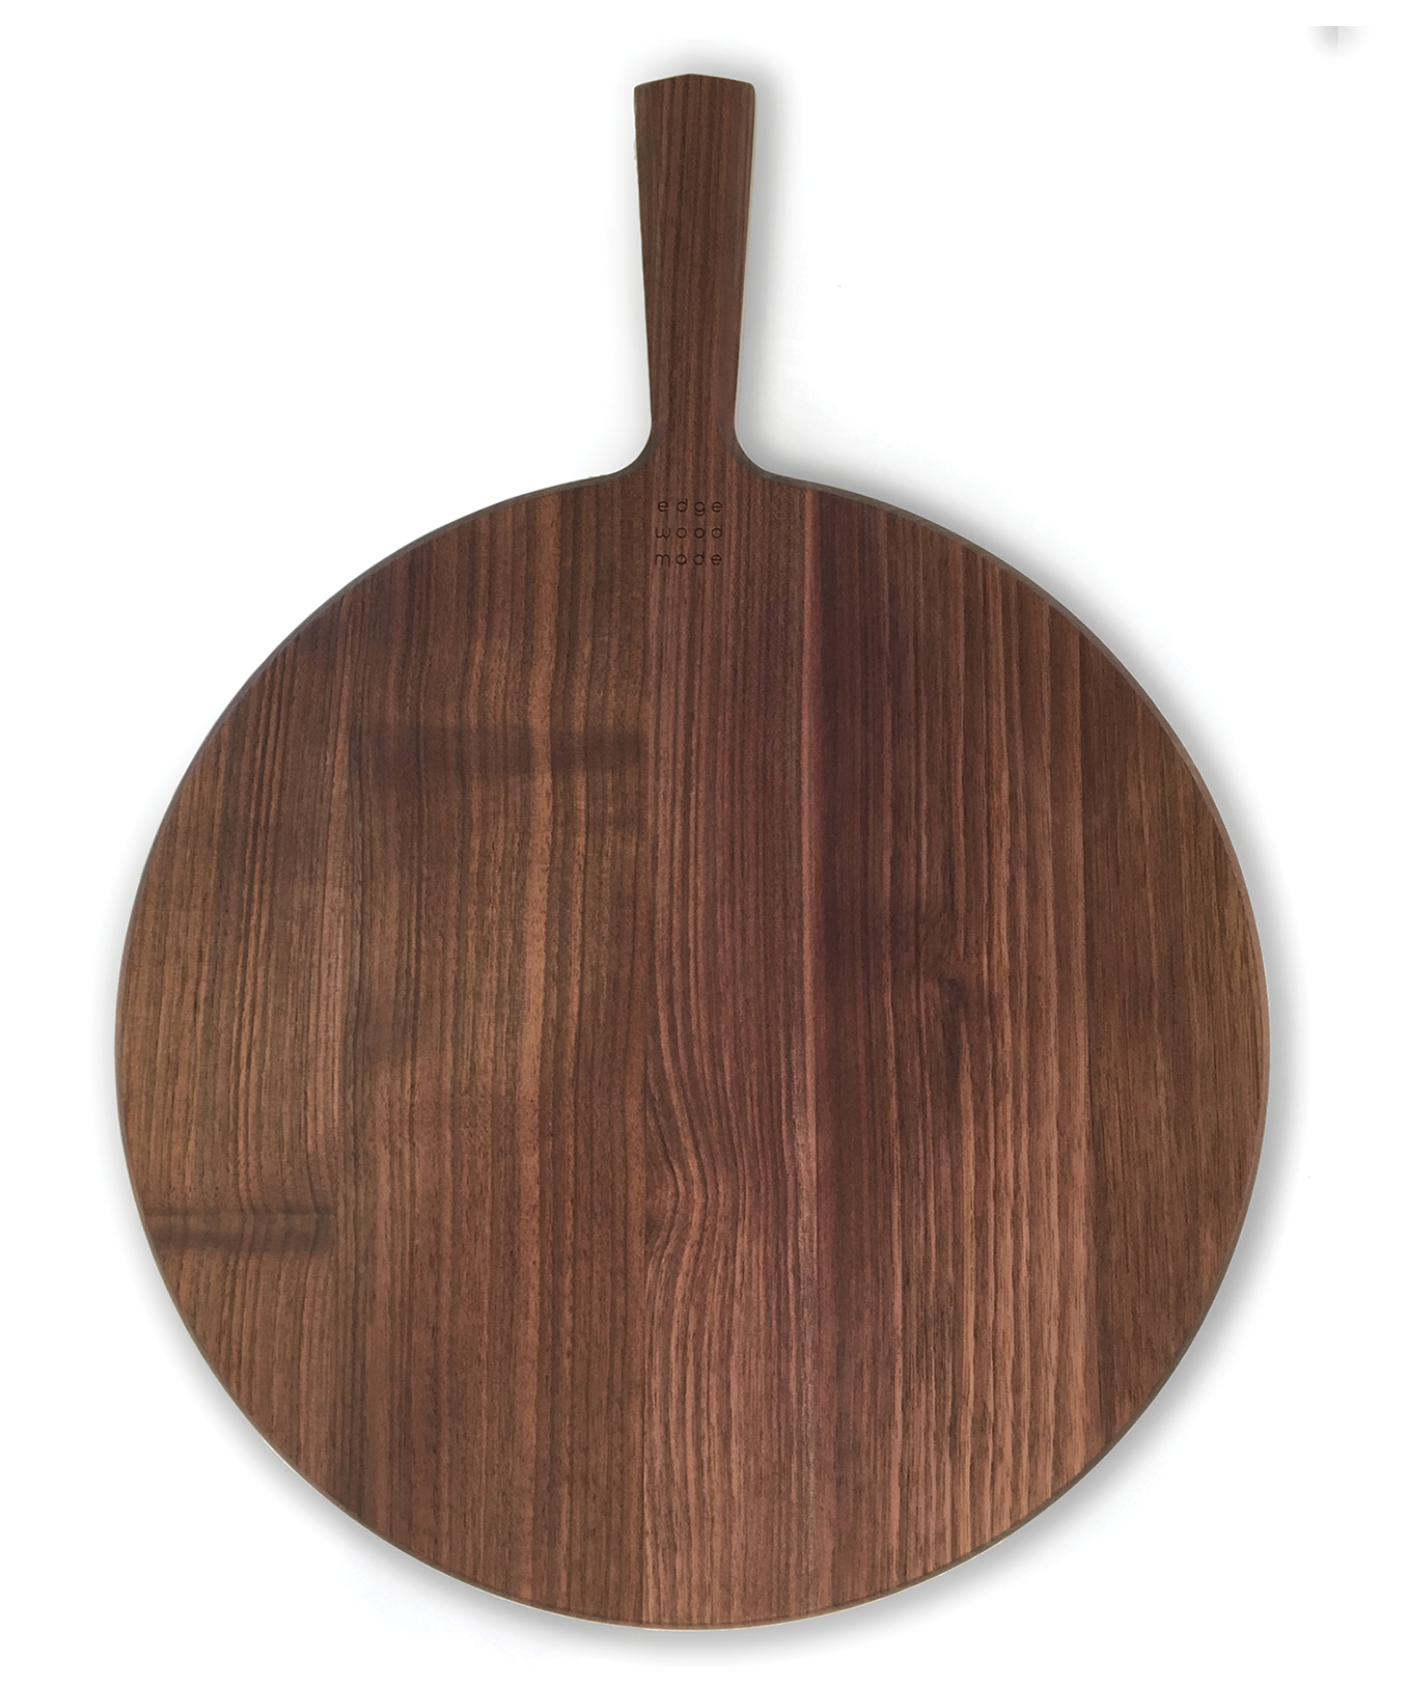 Extra Large Walnut Cutting Board With Rubber Feet, Pocket Handles, and –  Refine Kitchenware